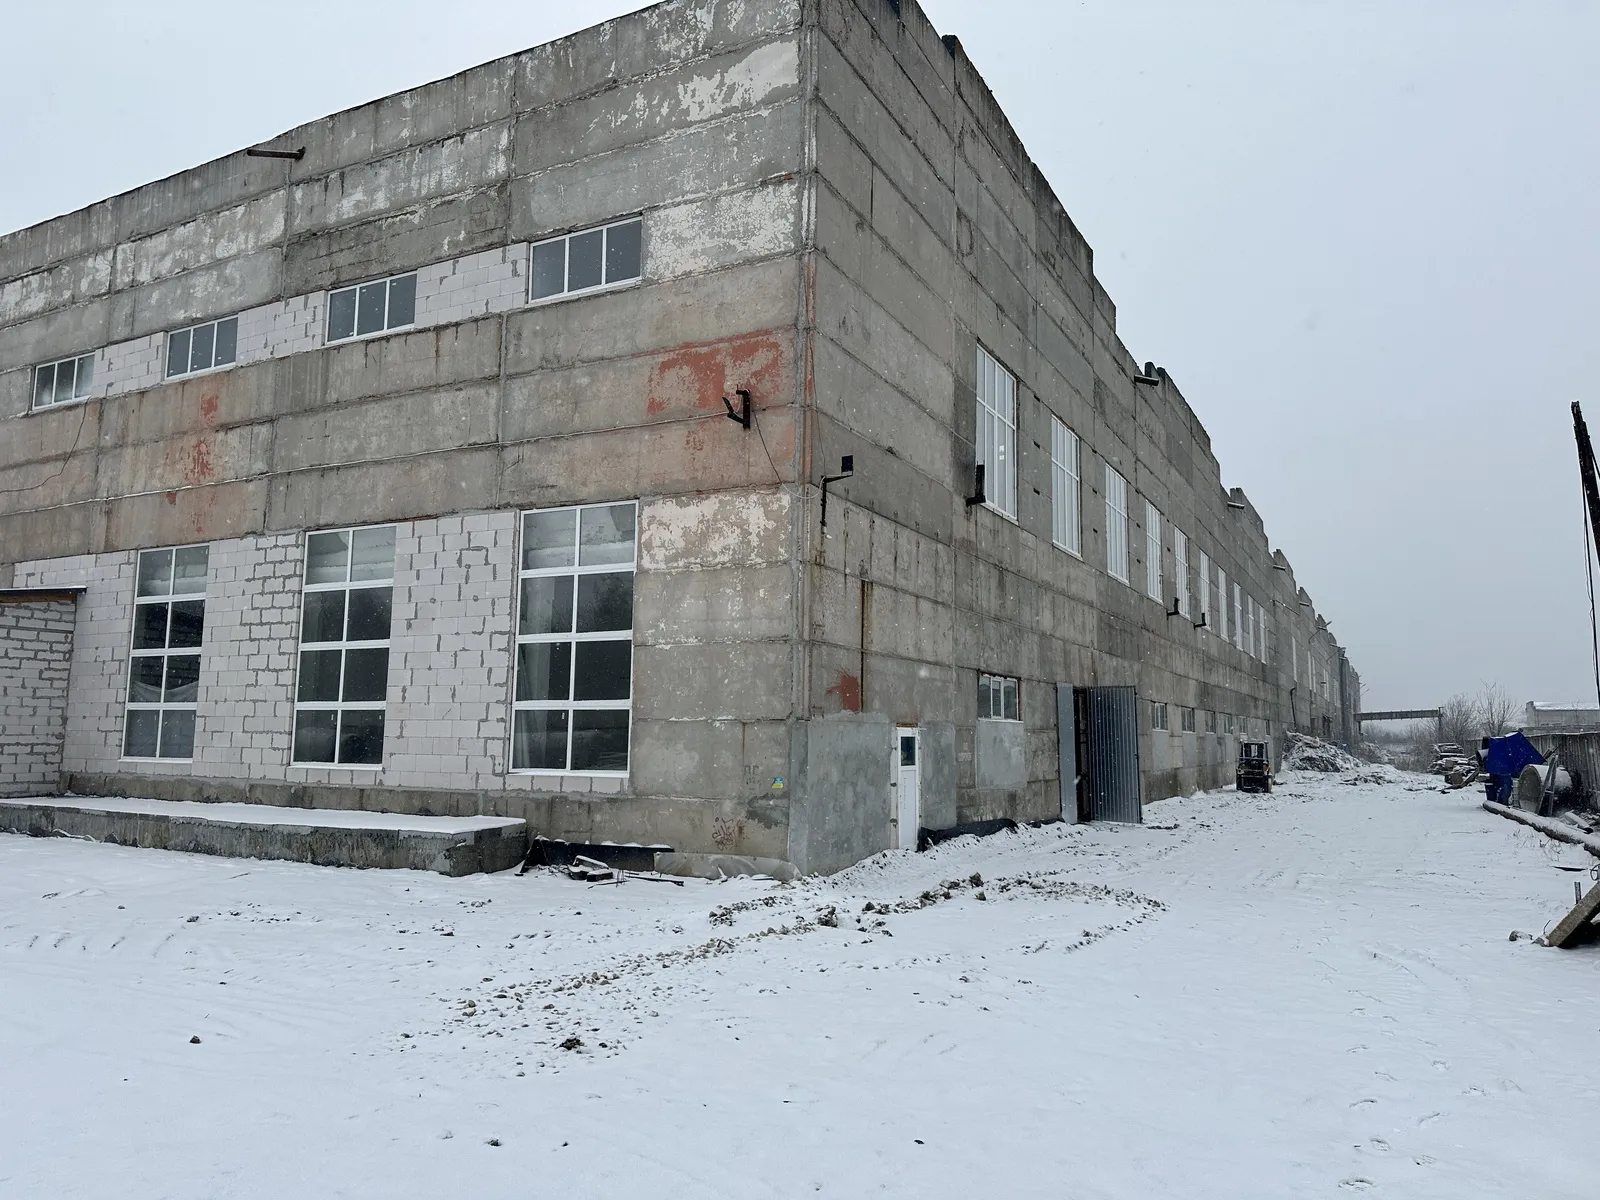 Real estate for sale for commercial purposes. 2500 m², 1st floor/2 floors. 8, Lukyanovycha D. vul., Ternopil. 